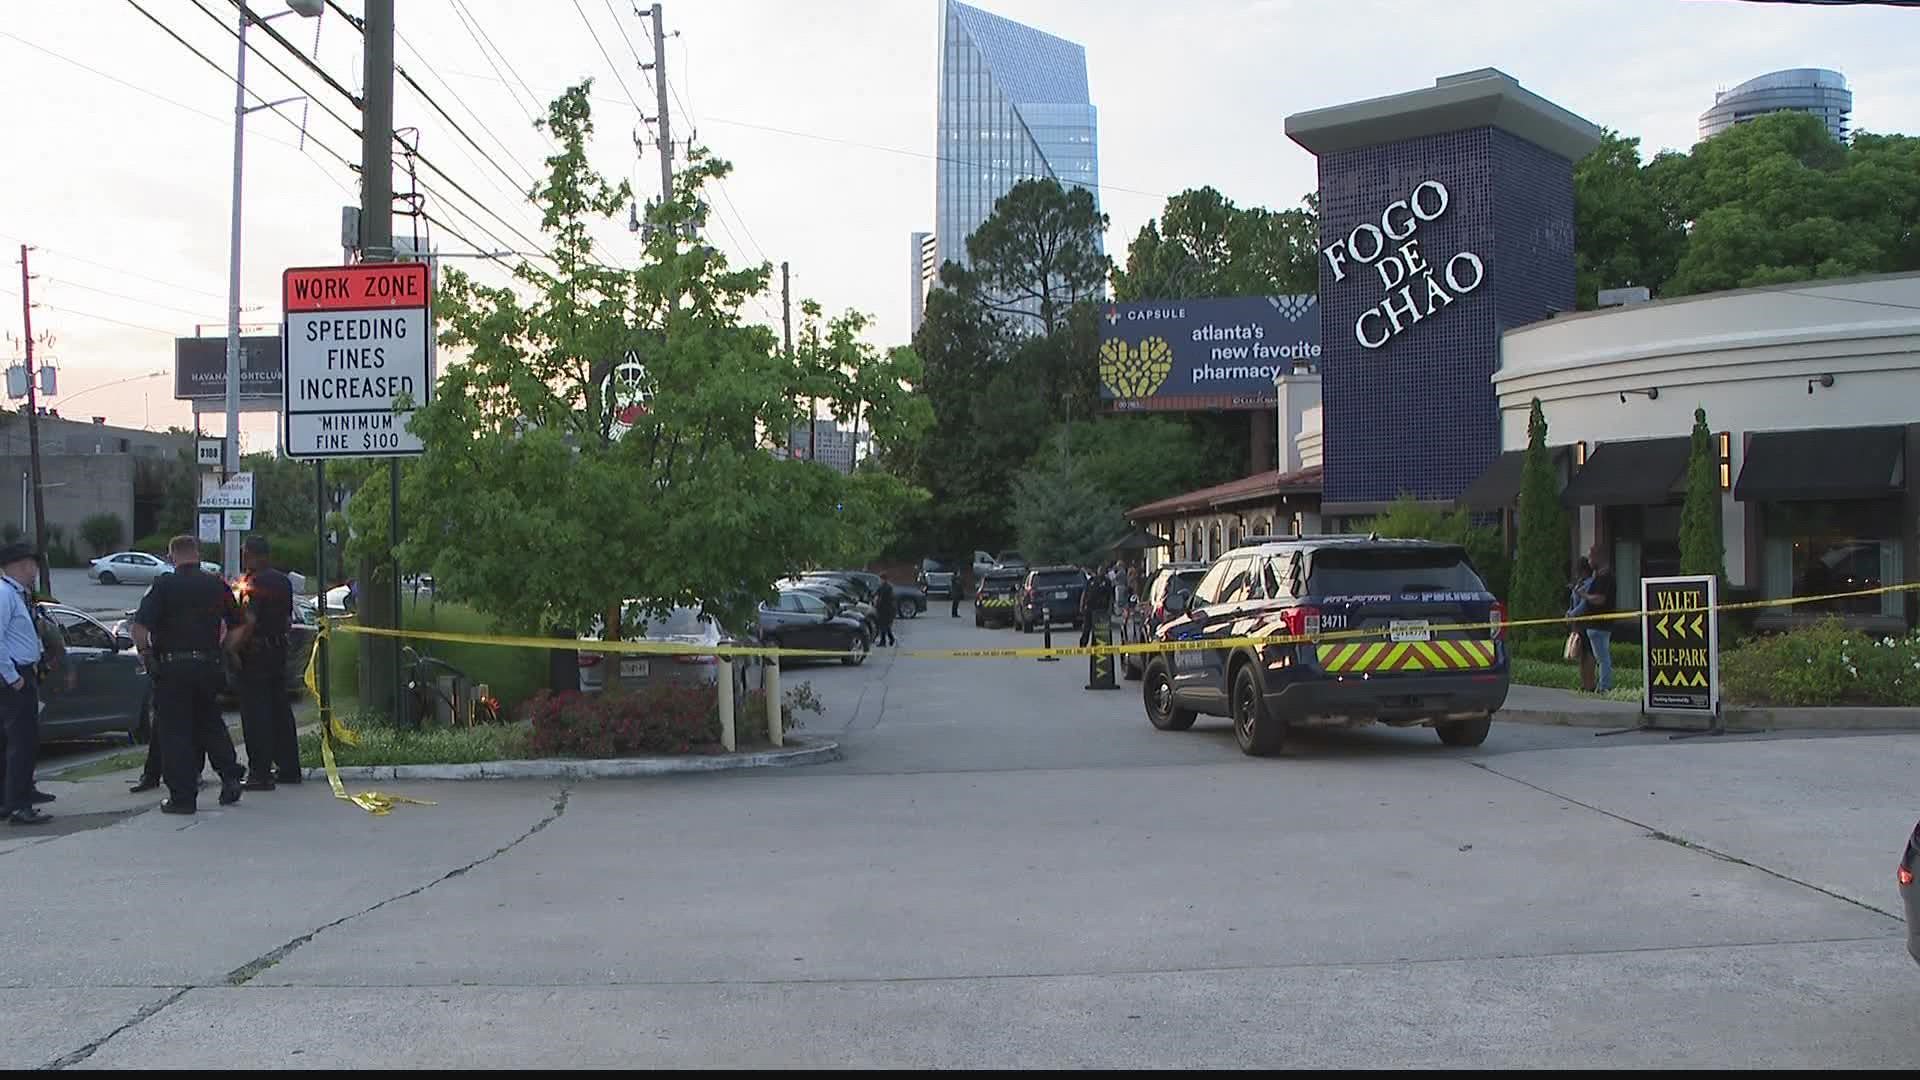 11Alive's Dawn White spoke to a law enforcement expert about police policies during a tense situation like the Buckhead restaurant shooting.